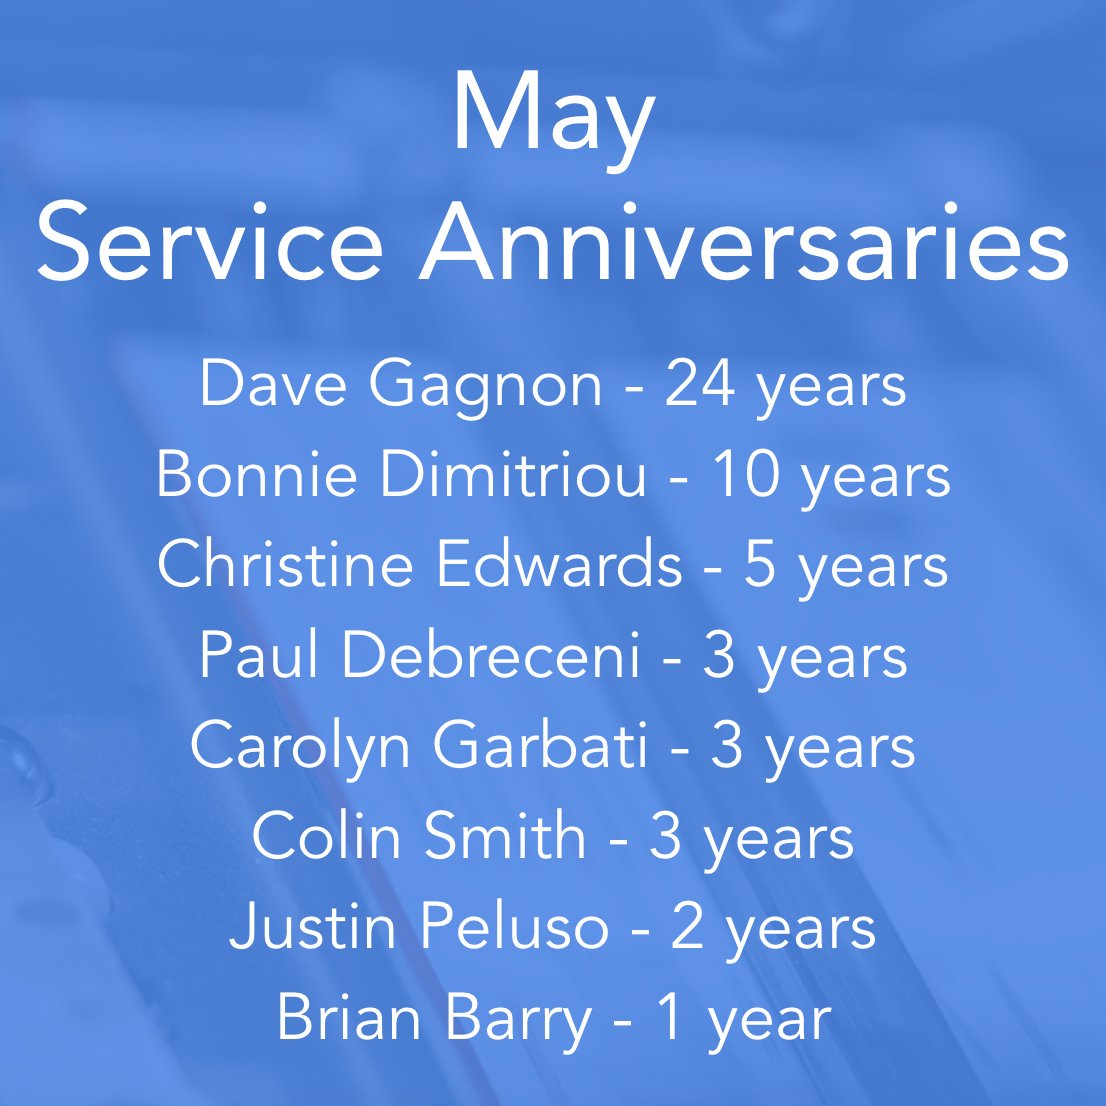 Congratulations to eight of our employees who are celebrating service anniversaries with Shawmut this month! You are all an important part of the Shawmut team! 👍🏆😀 #hardwork #employeeappreciation #serviceanniversaries #printing